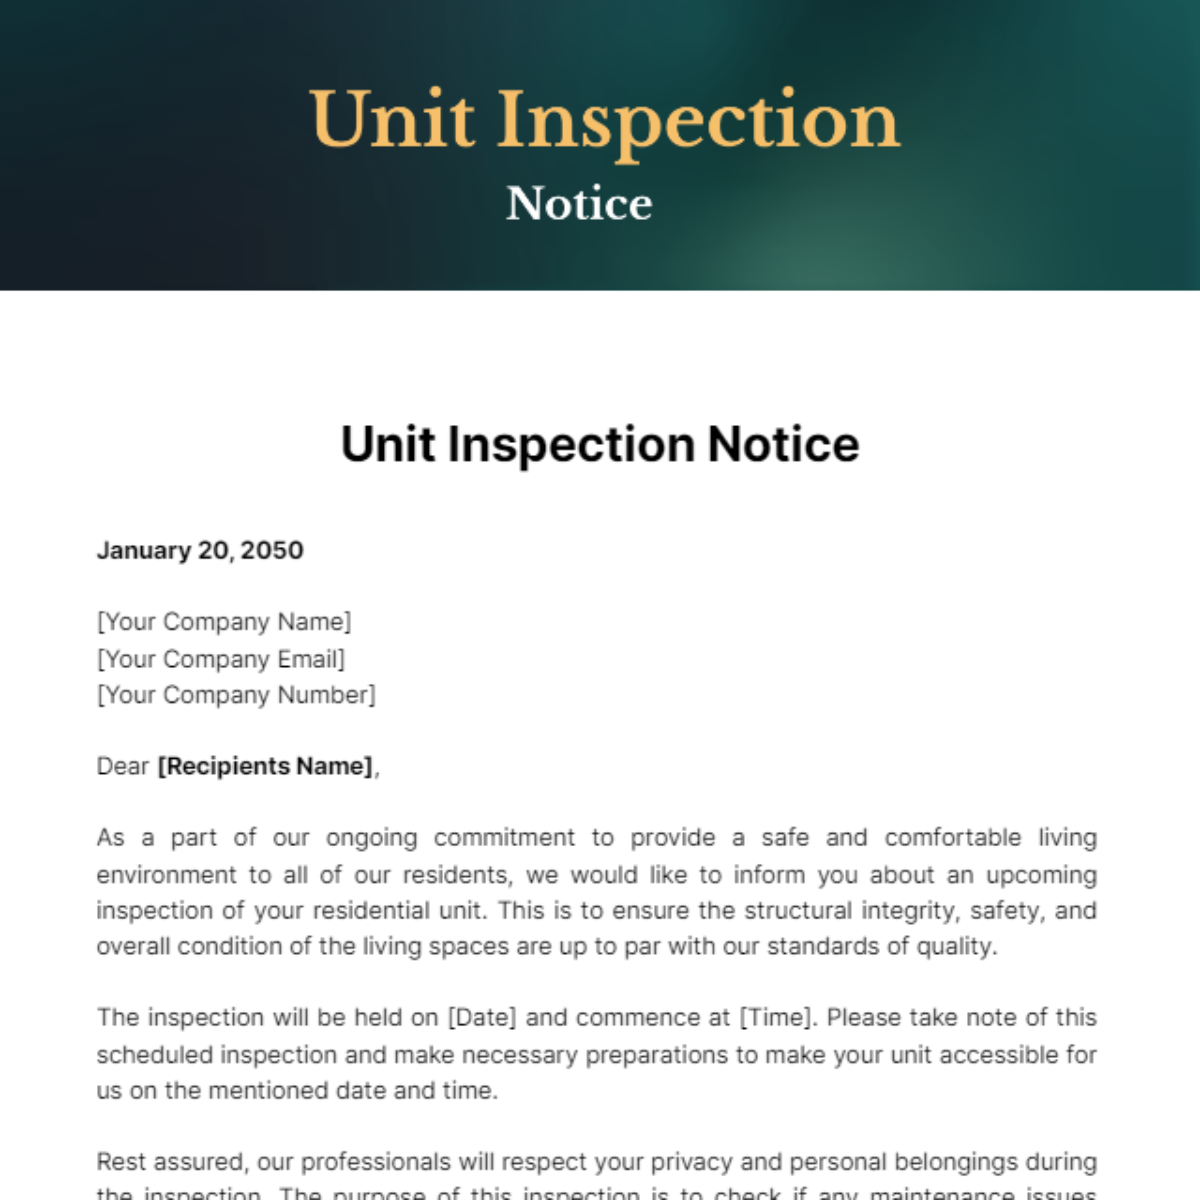 Free Unit Inspection Notice Template